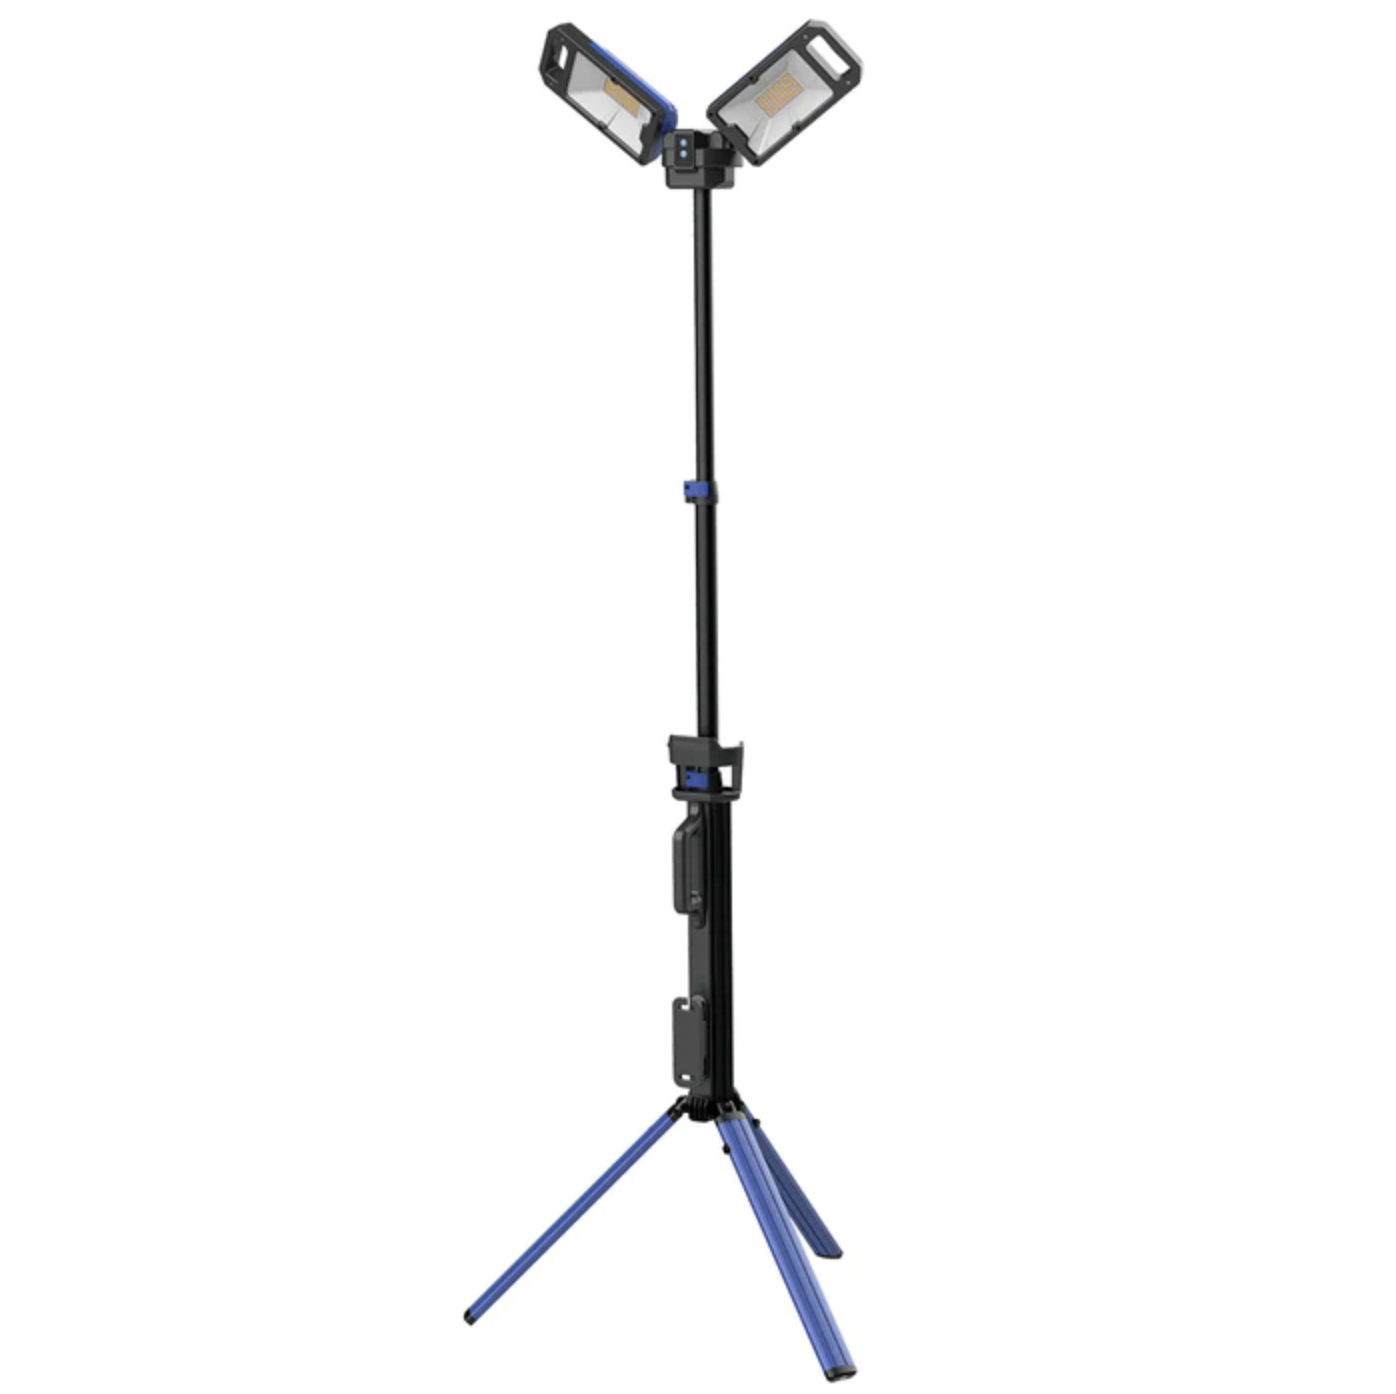 5,000 Lumen LED Rechargeable Tripod, Multiple Light Settings, Quick/Easy Foldable w/Charging Cord